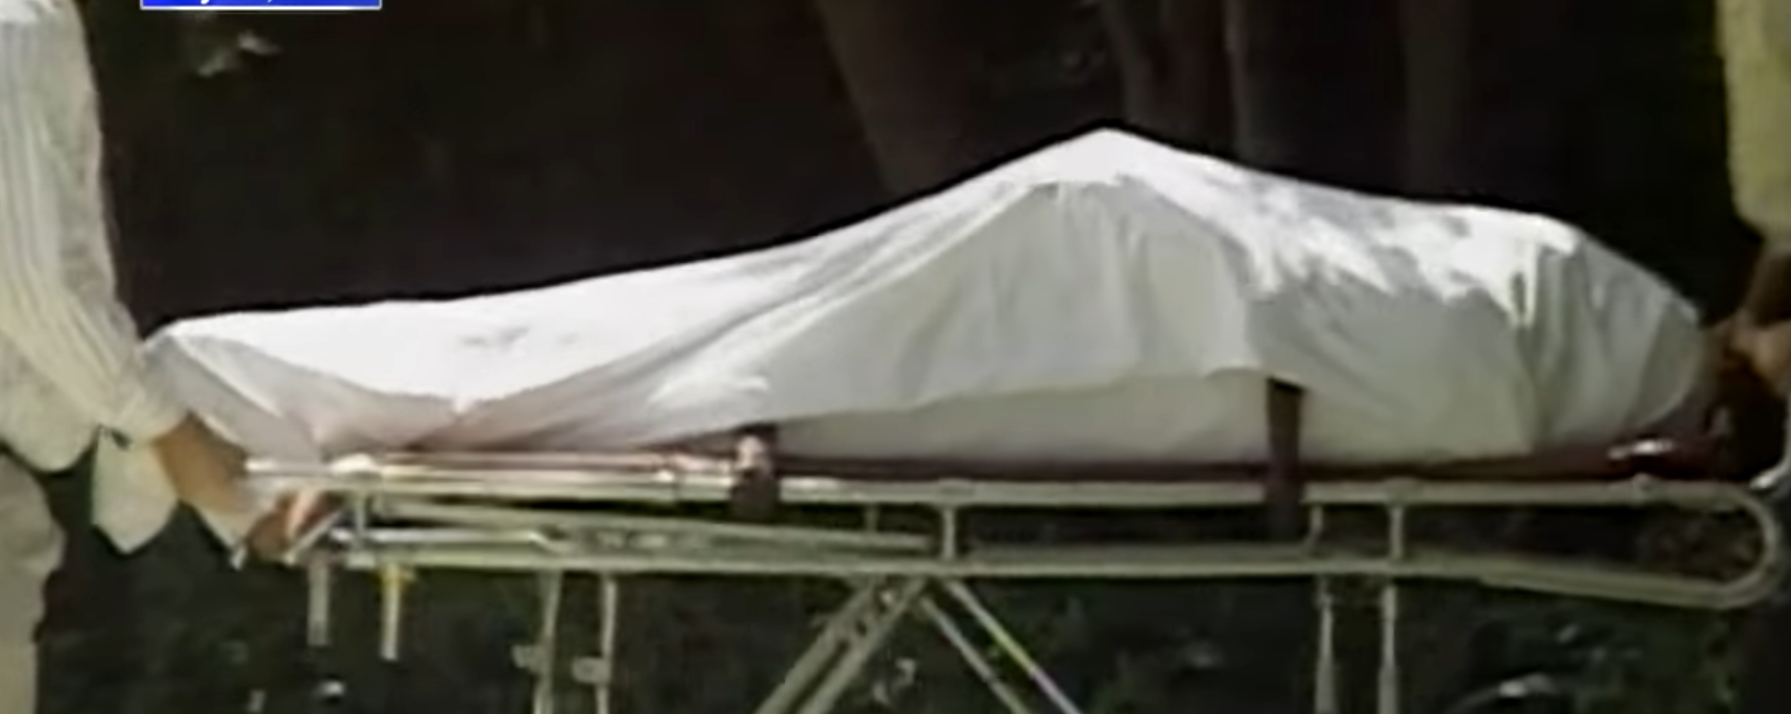 Phil Hartman's body being removed in Los Angeles, 1998 | Source: youtube.com/@InsideEdition